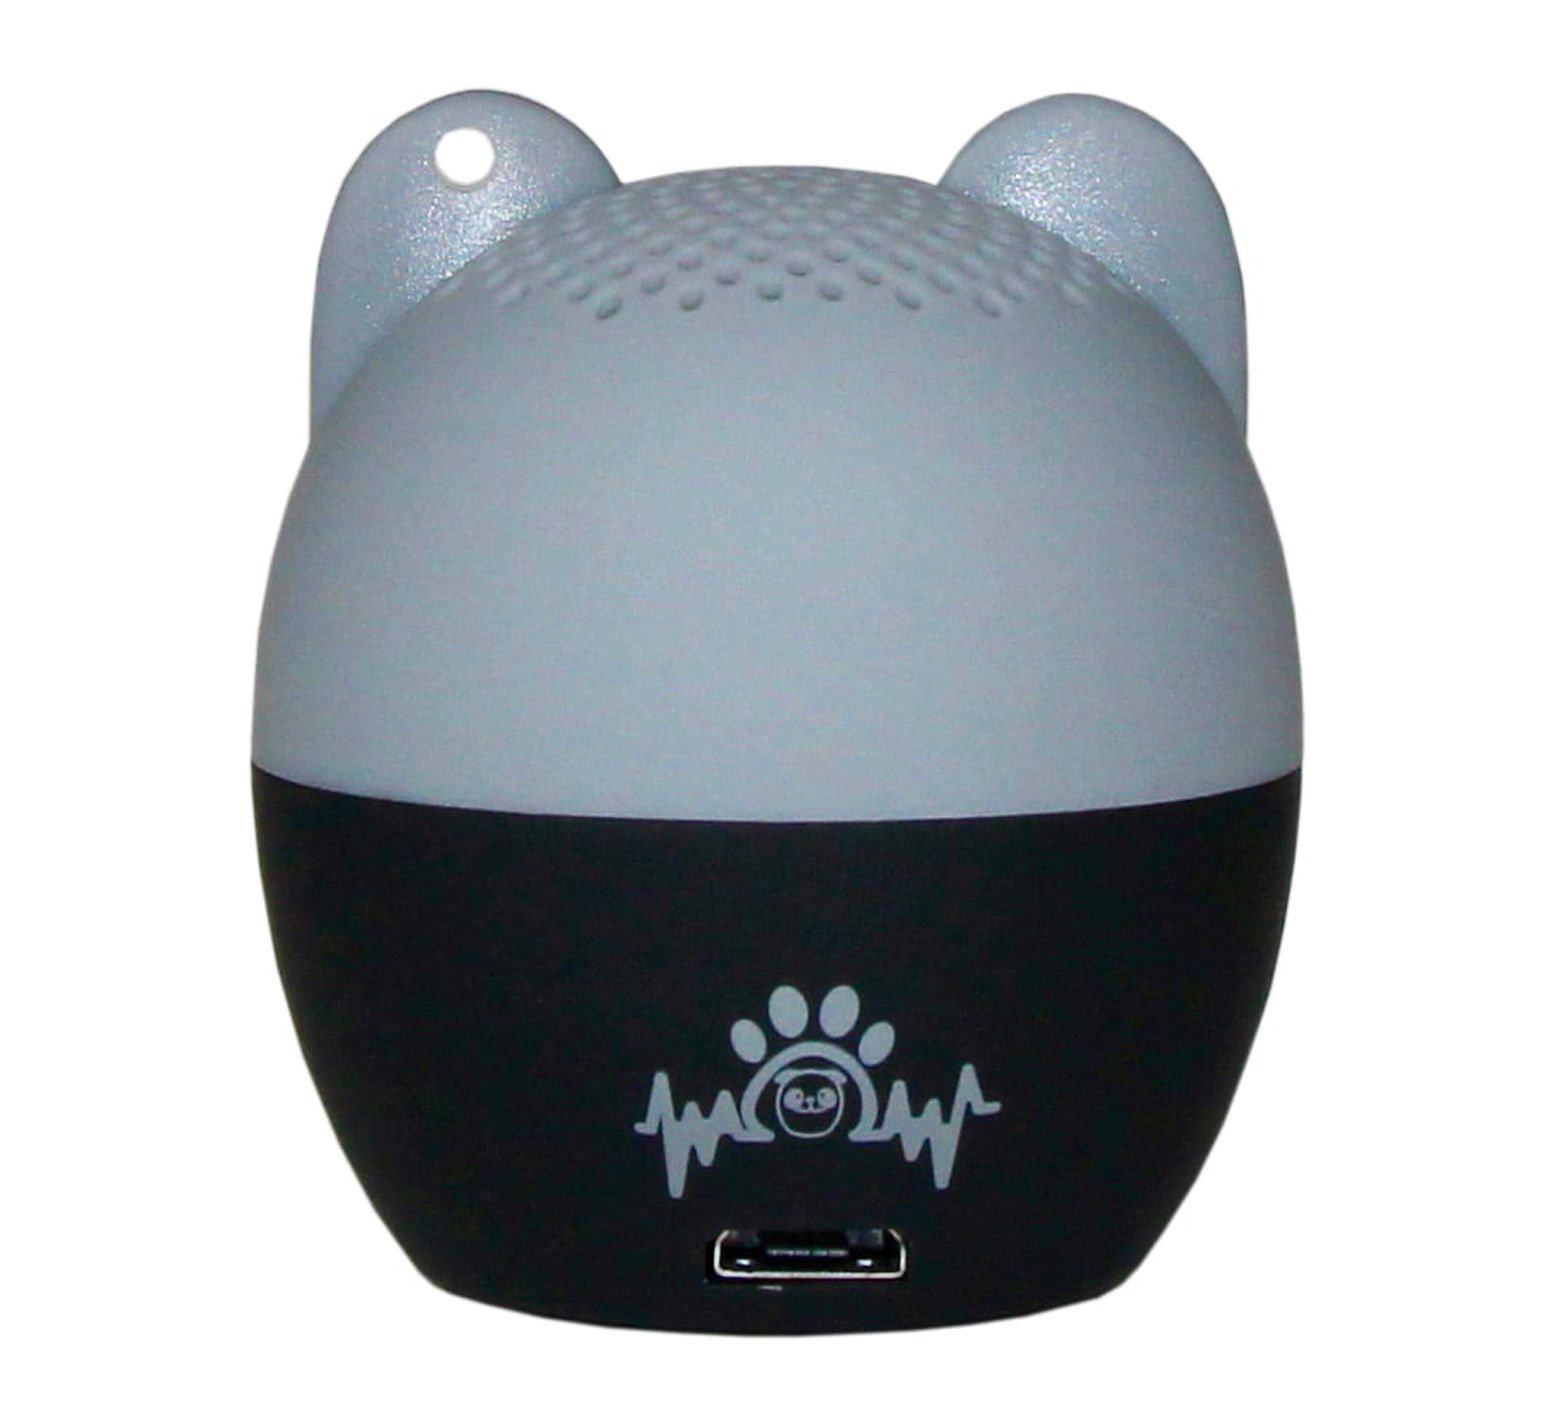 My Audio Pet (TWS) Mini Bluetooth Animal Wireless Speaker with TRUE WIRELESS STEREO TECHNOLOGY _ Pair with another TWS Pet for Powerful Rich Room-filling Sound _ (Mega Mouse) - image 4 of 6